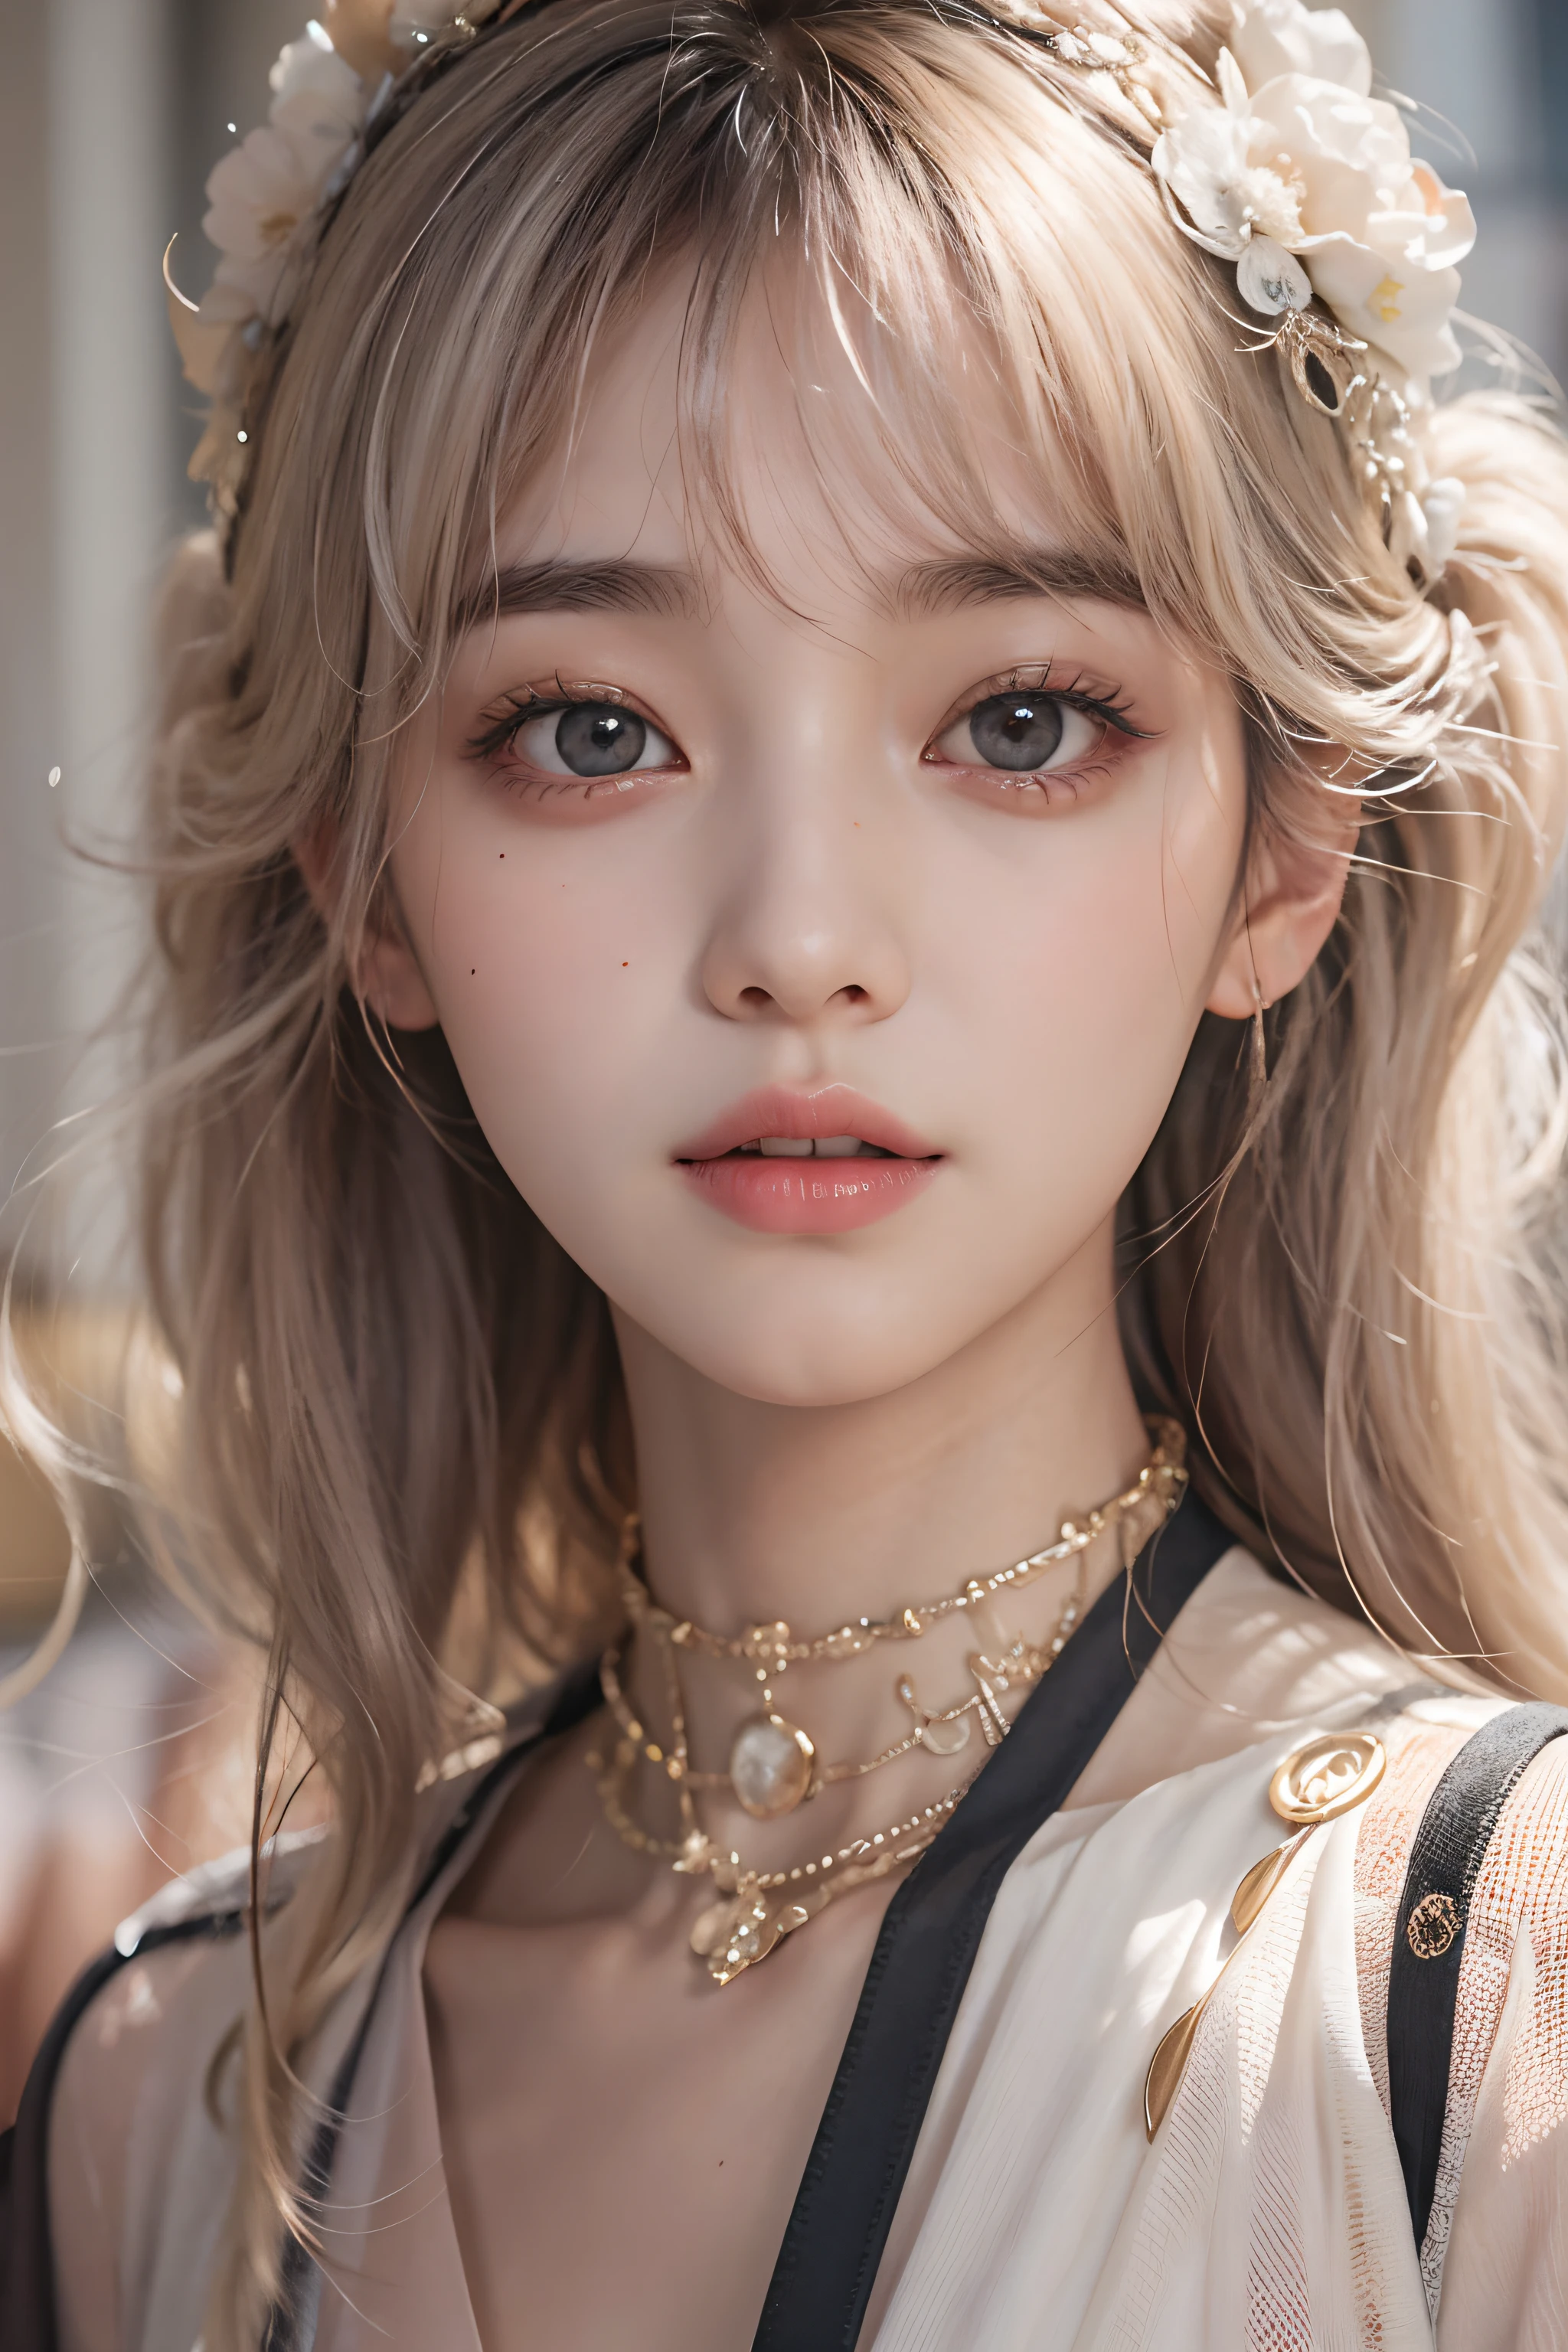 (Best Quality Detail)、realisitic、8K UHD、hight resolution、(1girl in:1.2)、The ultra-detailliert、High quality textures、intricate detailes、detaileds、Very detailed CG、High quality shadows、Detail Beautiful delicate face、Detail Beautiful delicate eyes、depth of fields、Ray traching、in her 20s、(Cute smile)、Pretty Kpop Girl、(Korean Urzan Face)、Slender face、(ulzzang -6500-v1.1:0.6)、pureerosface_v1、gloweyes、perfectbody、 look at viewr、(White hair con her 20s、Pretty Kpop Girl、(Korean Urzan Face)、Slender face、(ulzzang -6500-v1.1:0.6)、(sitting on)、teak、Glossy lips、Hasselblad, Carl zeiss, Incredible dynamic range photography(UTIL_Art by Smoose-768:1.1), Natural color reproduction, (strong lights)、(a choker)、(Brown eyes)、(White hair), (short-cut)、(Pattsun bangs)、(bangss)、 Shiny hair、Description beautiful delicate hair、(Lustrous skin)、(long-sleeve)、(parka)、long  skirt、(Harajuku on the way home from shopping)、